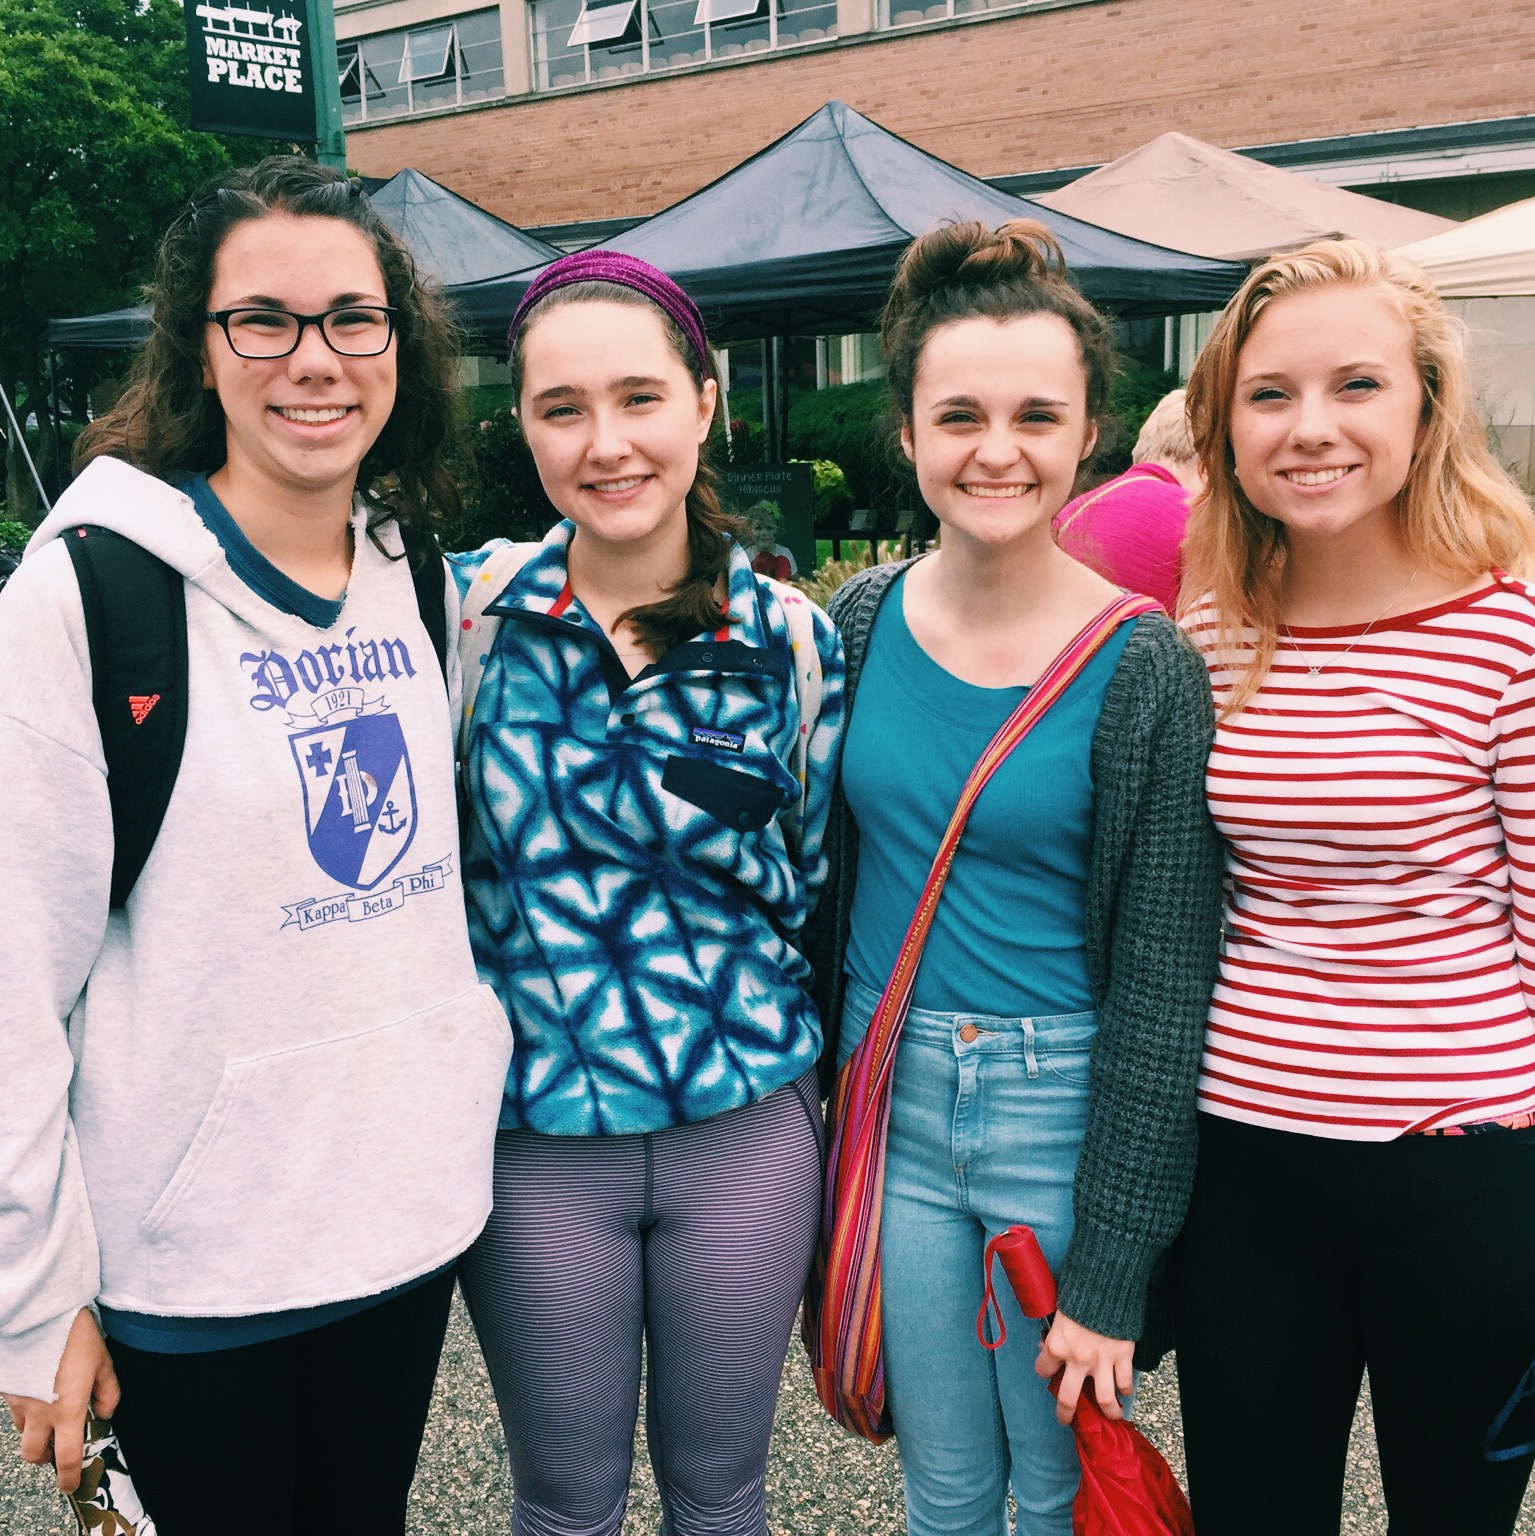 On Saturday my friends and I went to the farmer's market in downtown Holland!